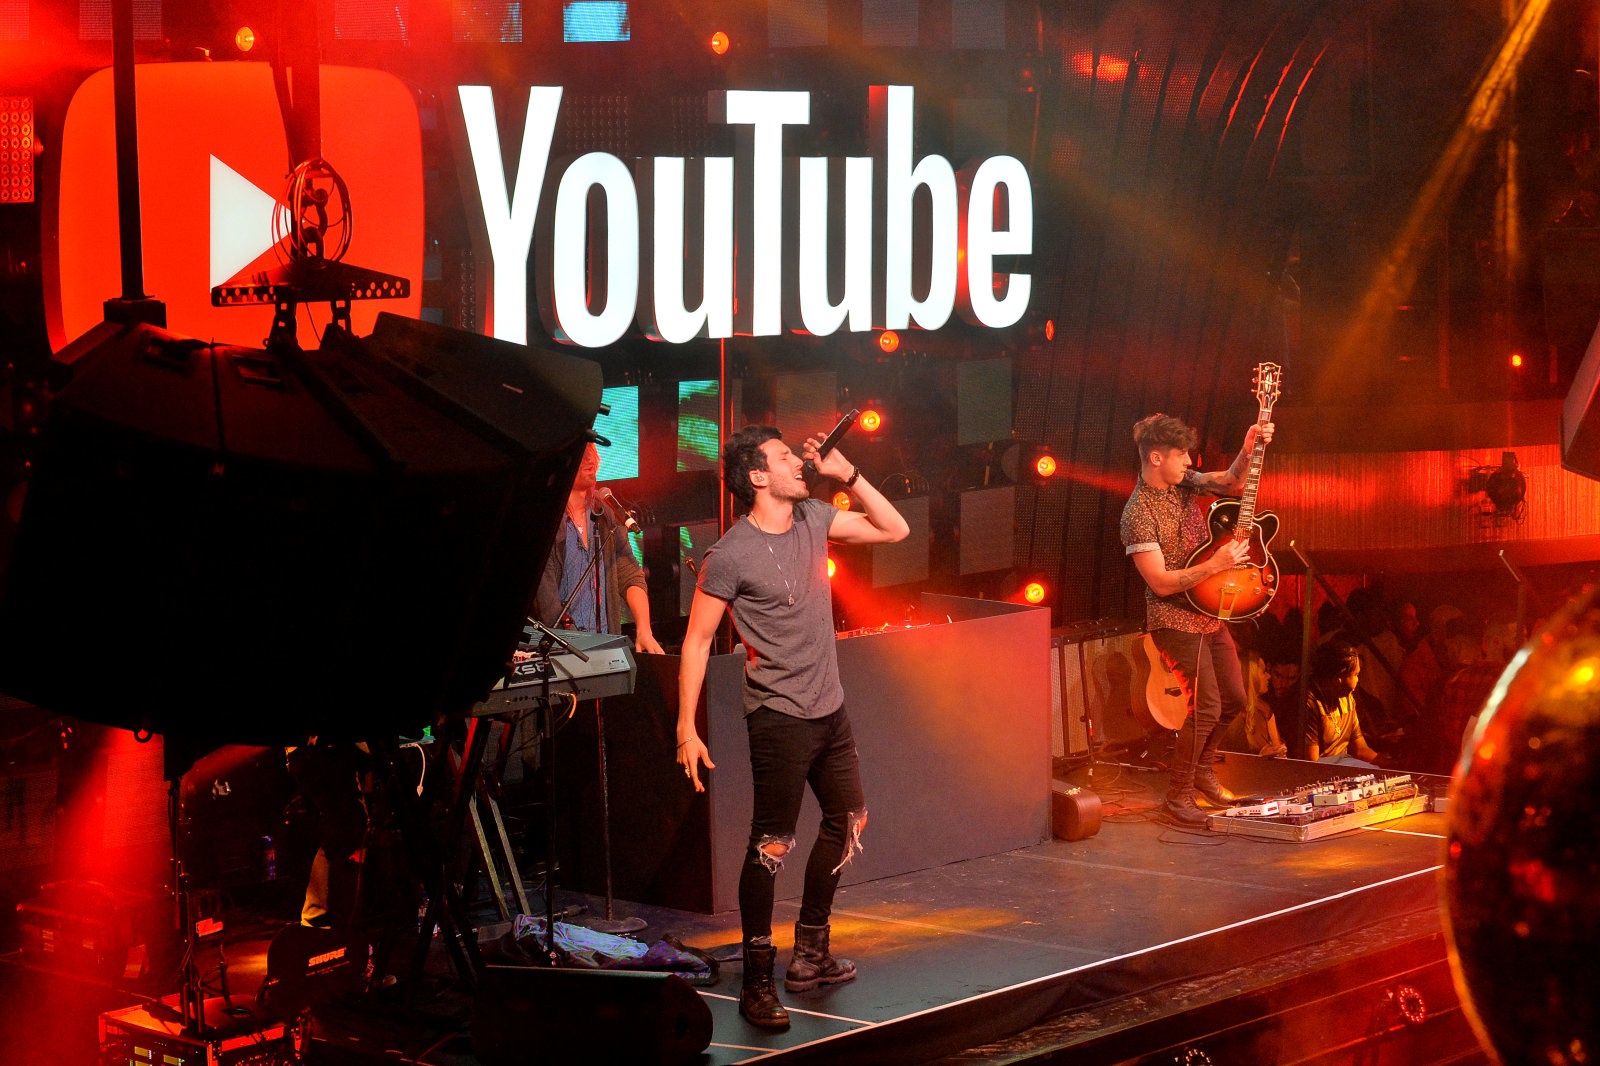 YouTube’s unified artist channels clean up its music mess